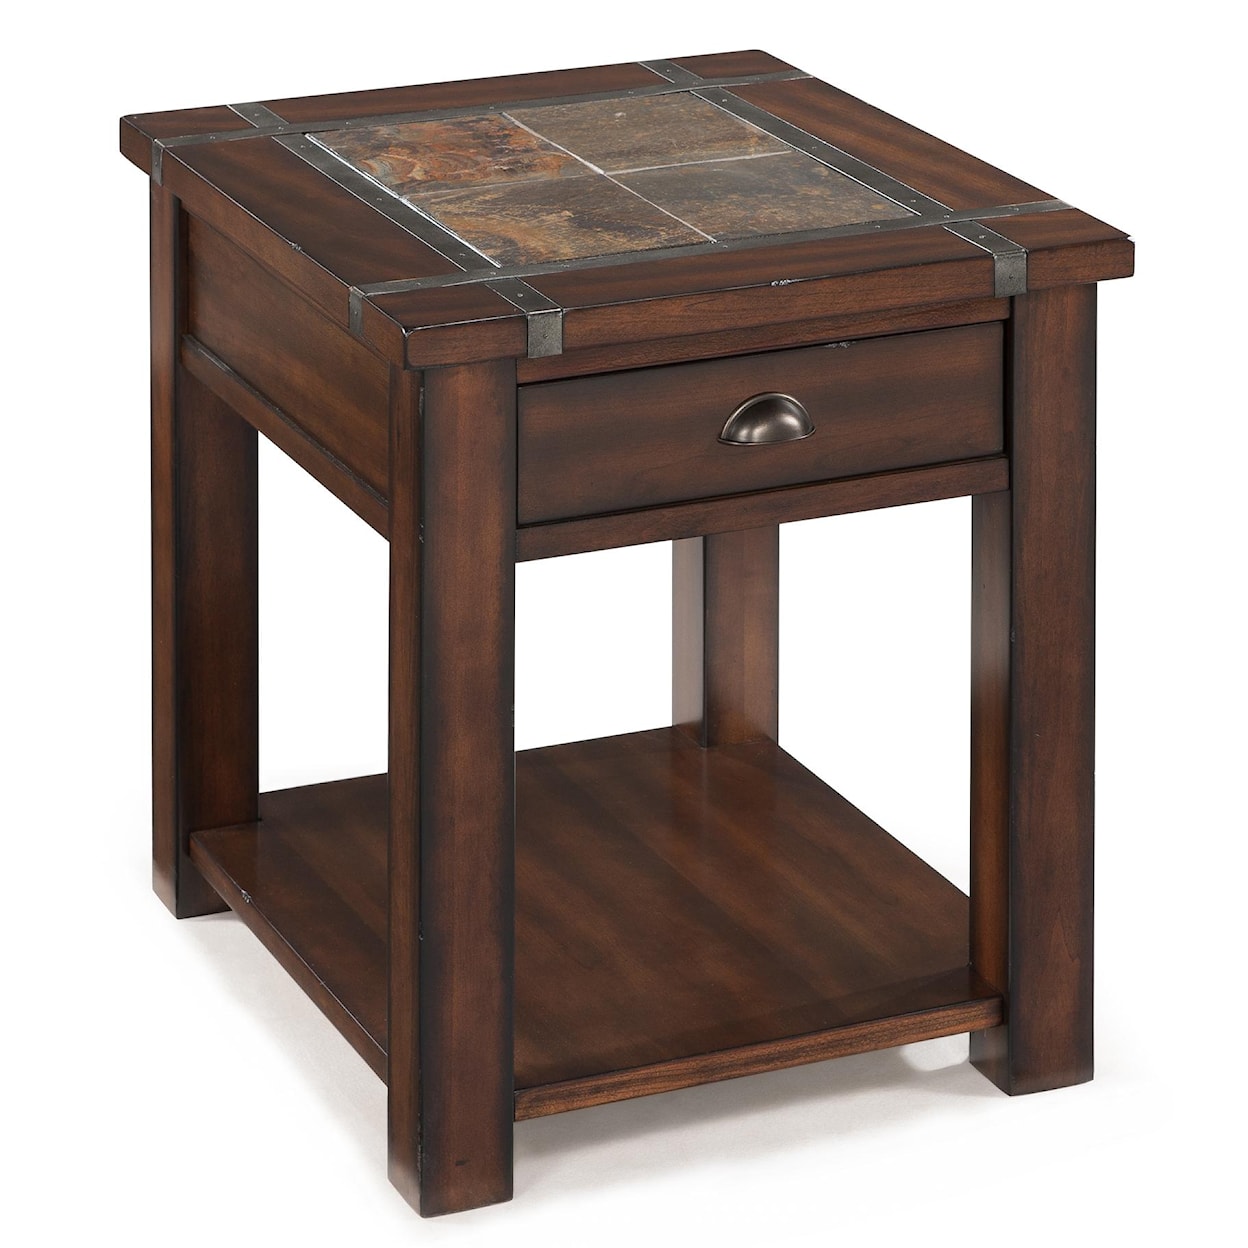 Magnussen Home Roanoke Occasional Tables Rectangular End Table